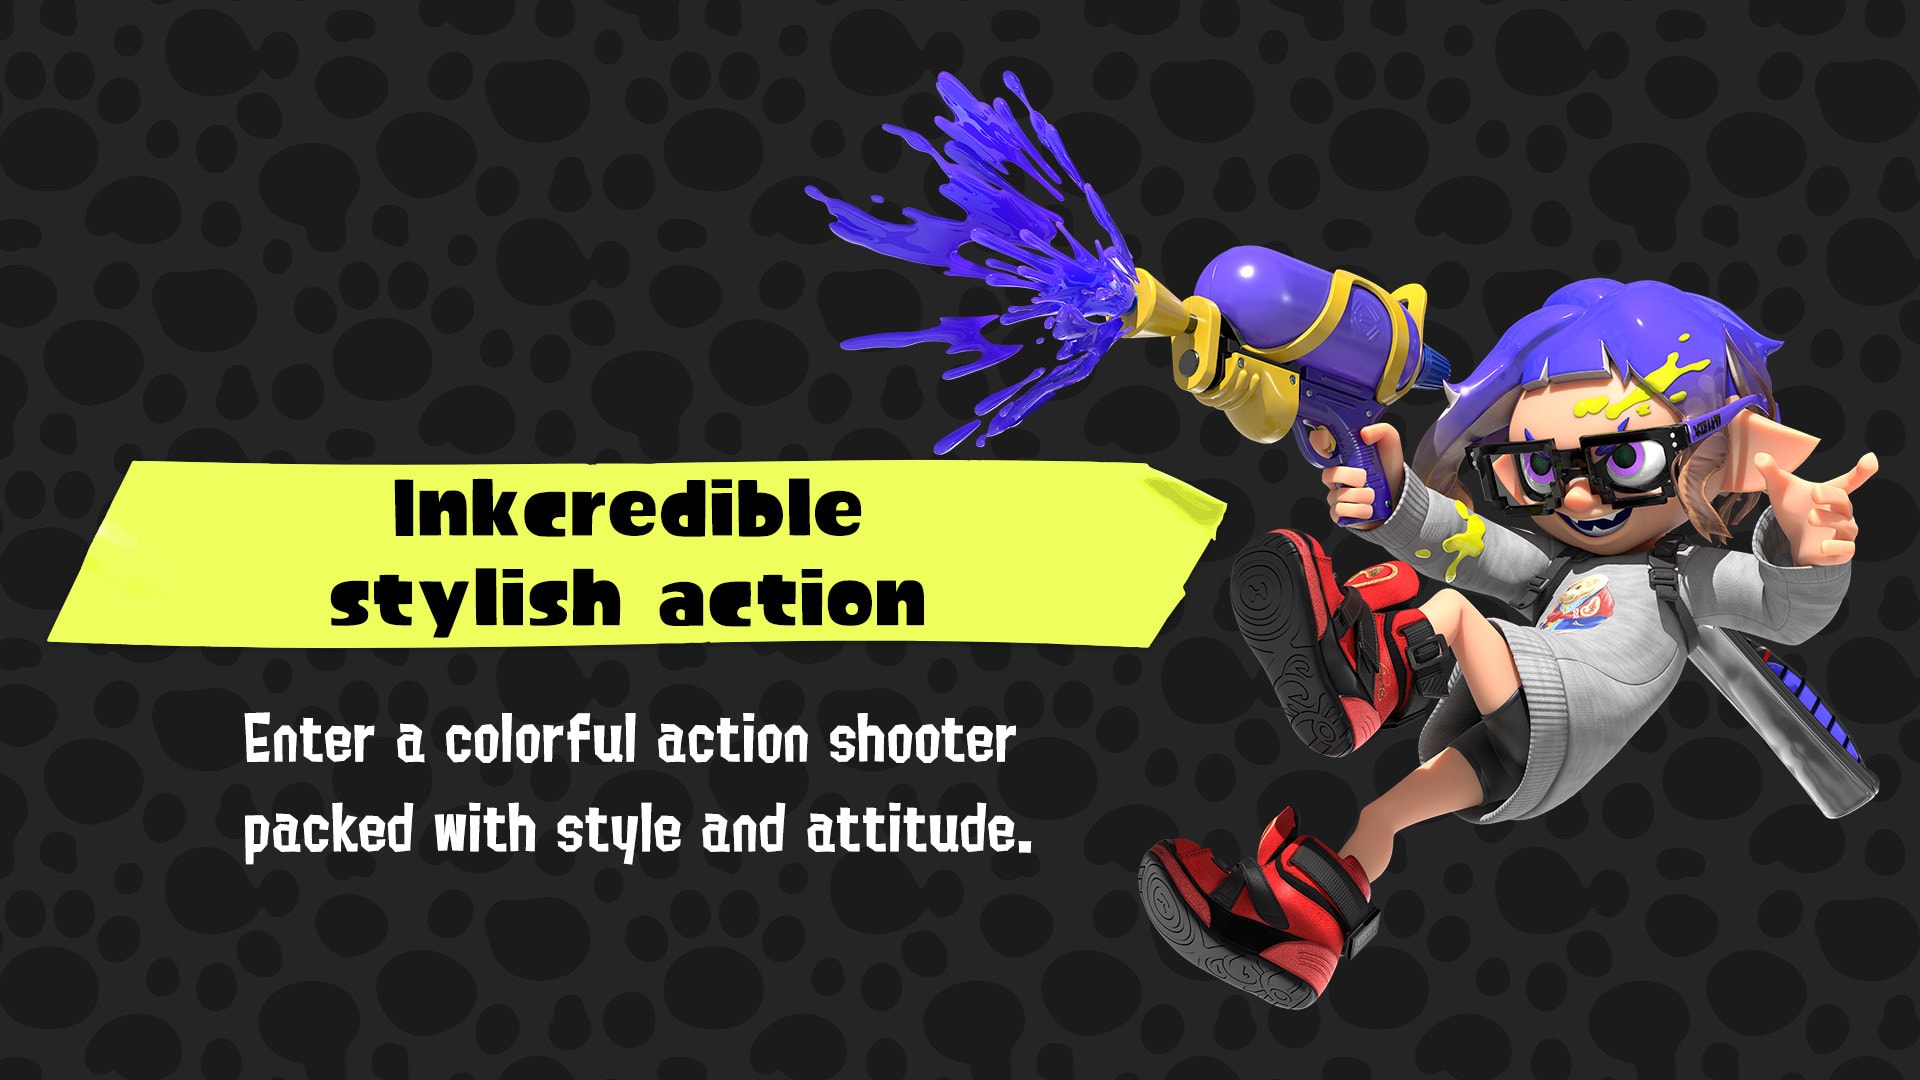 Catch up on what Splatoon 3 has to offer Intro Image